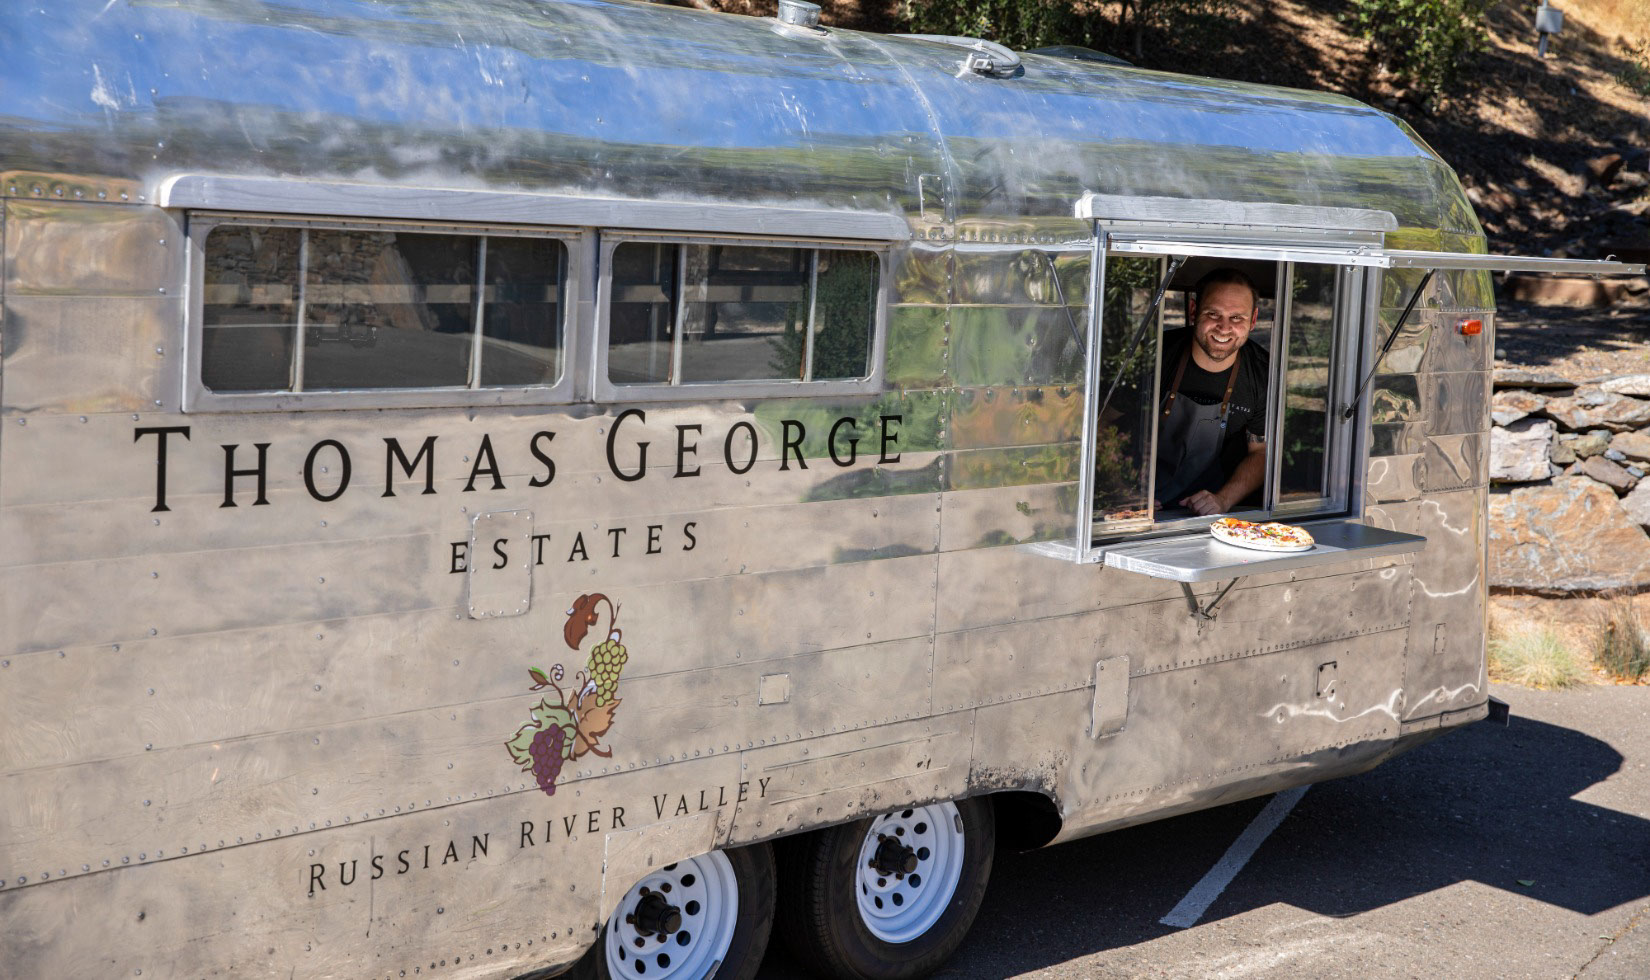 A silver airstream with the thomas george logo with a window open serving pizza